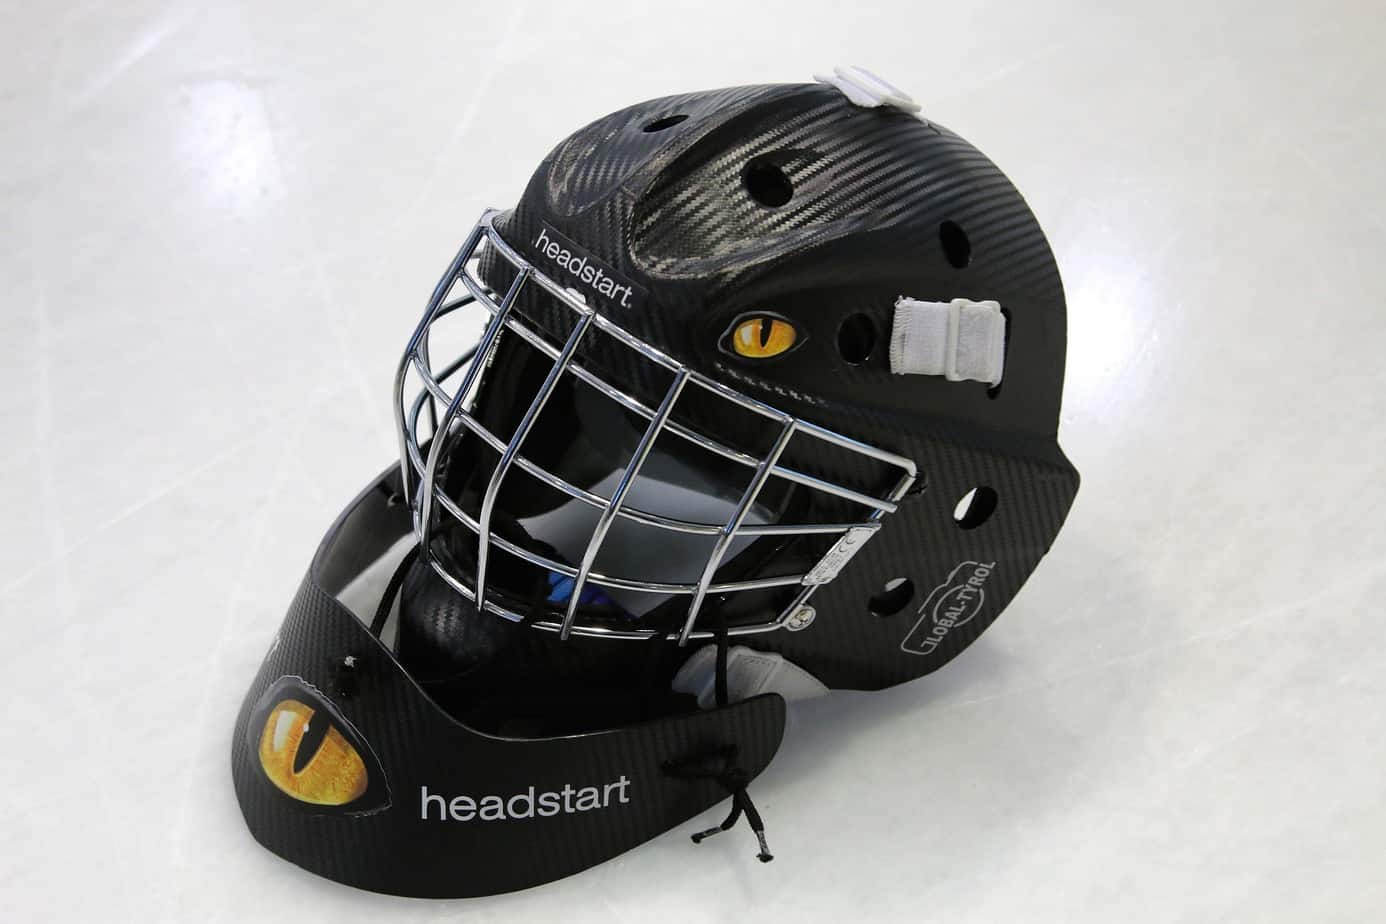 Why Does My Hockey Helmet Hurt? Fit Research